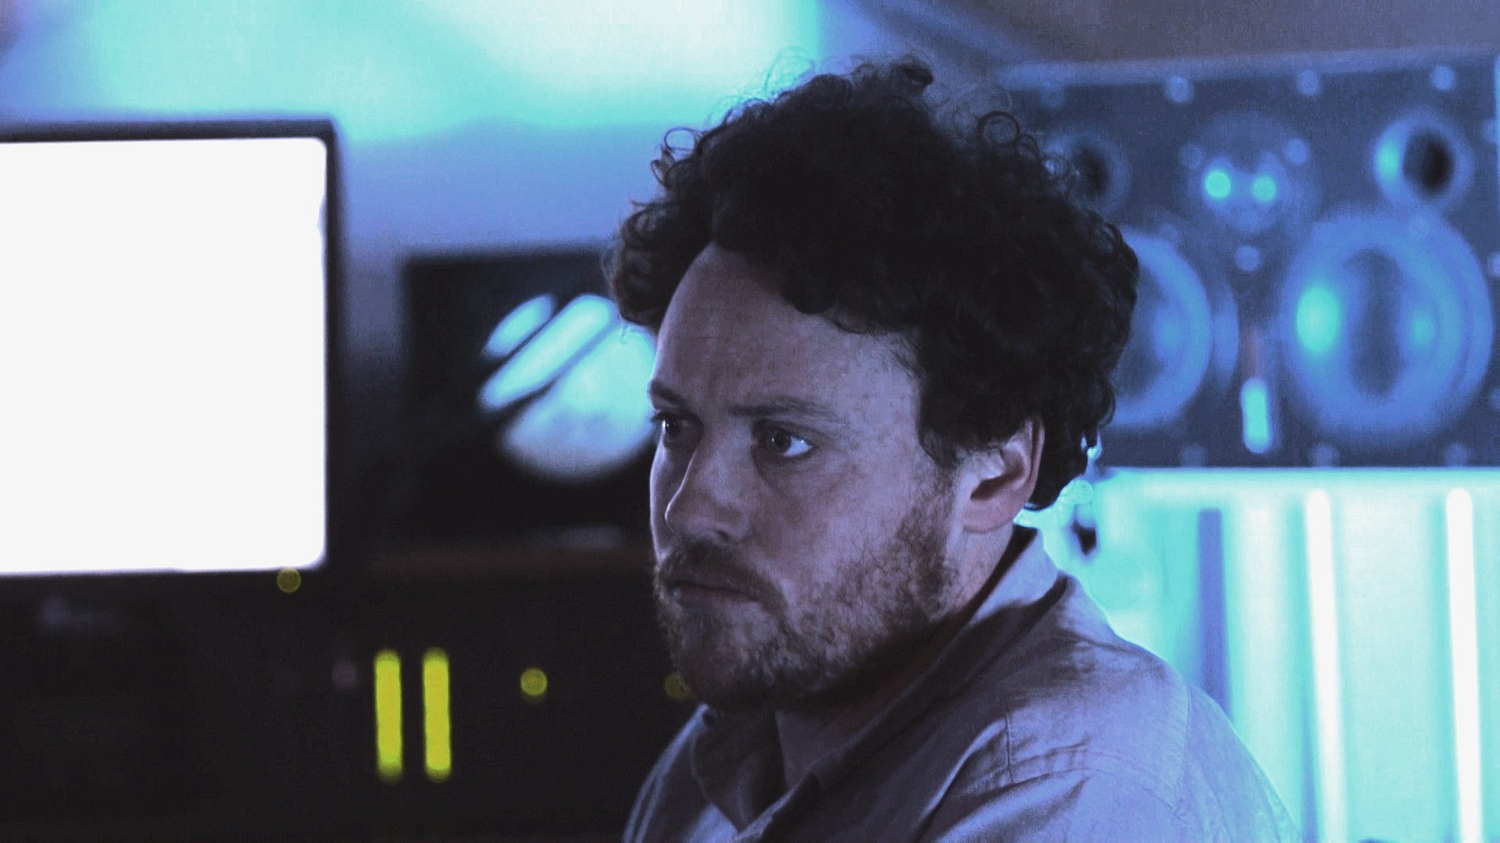 Metronomy: "I guess this album is an audio pedicure"